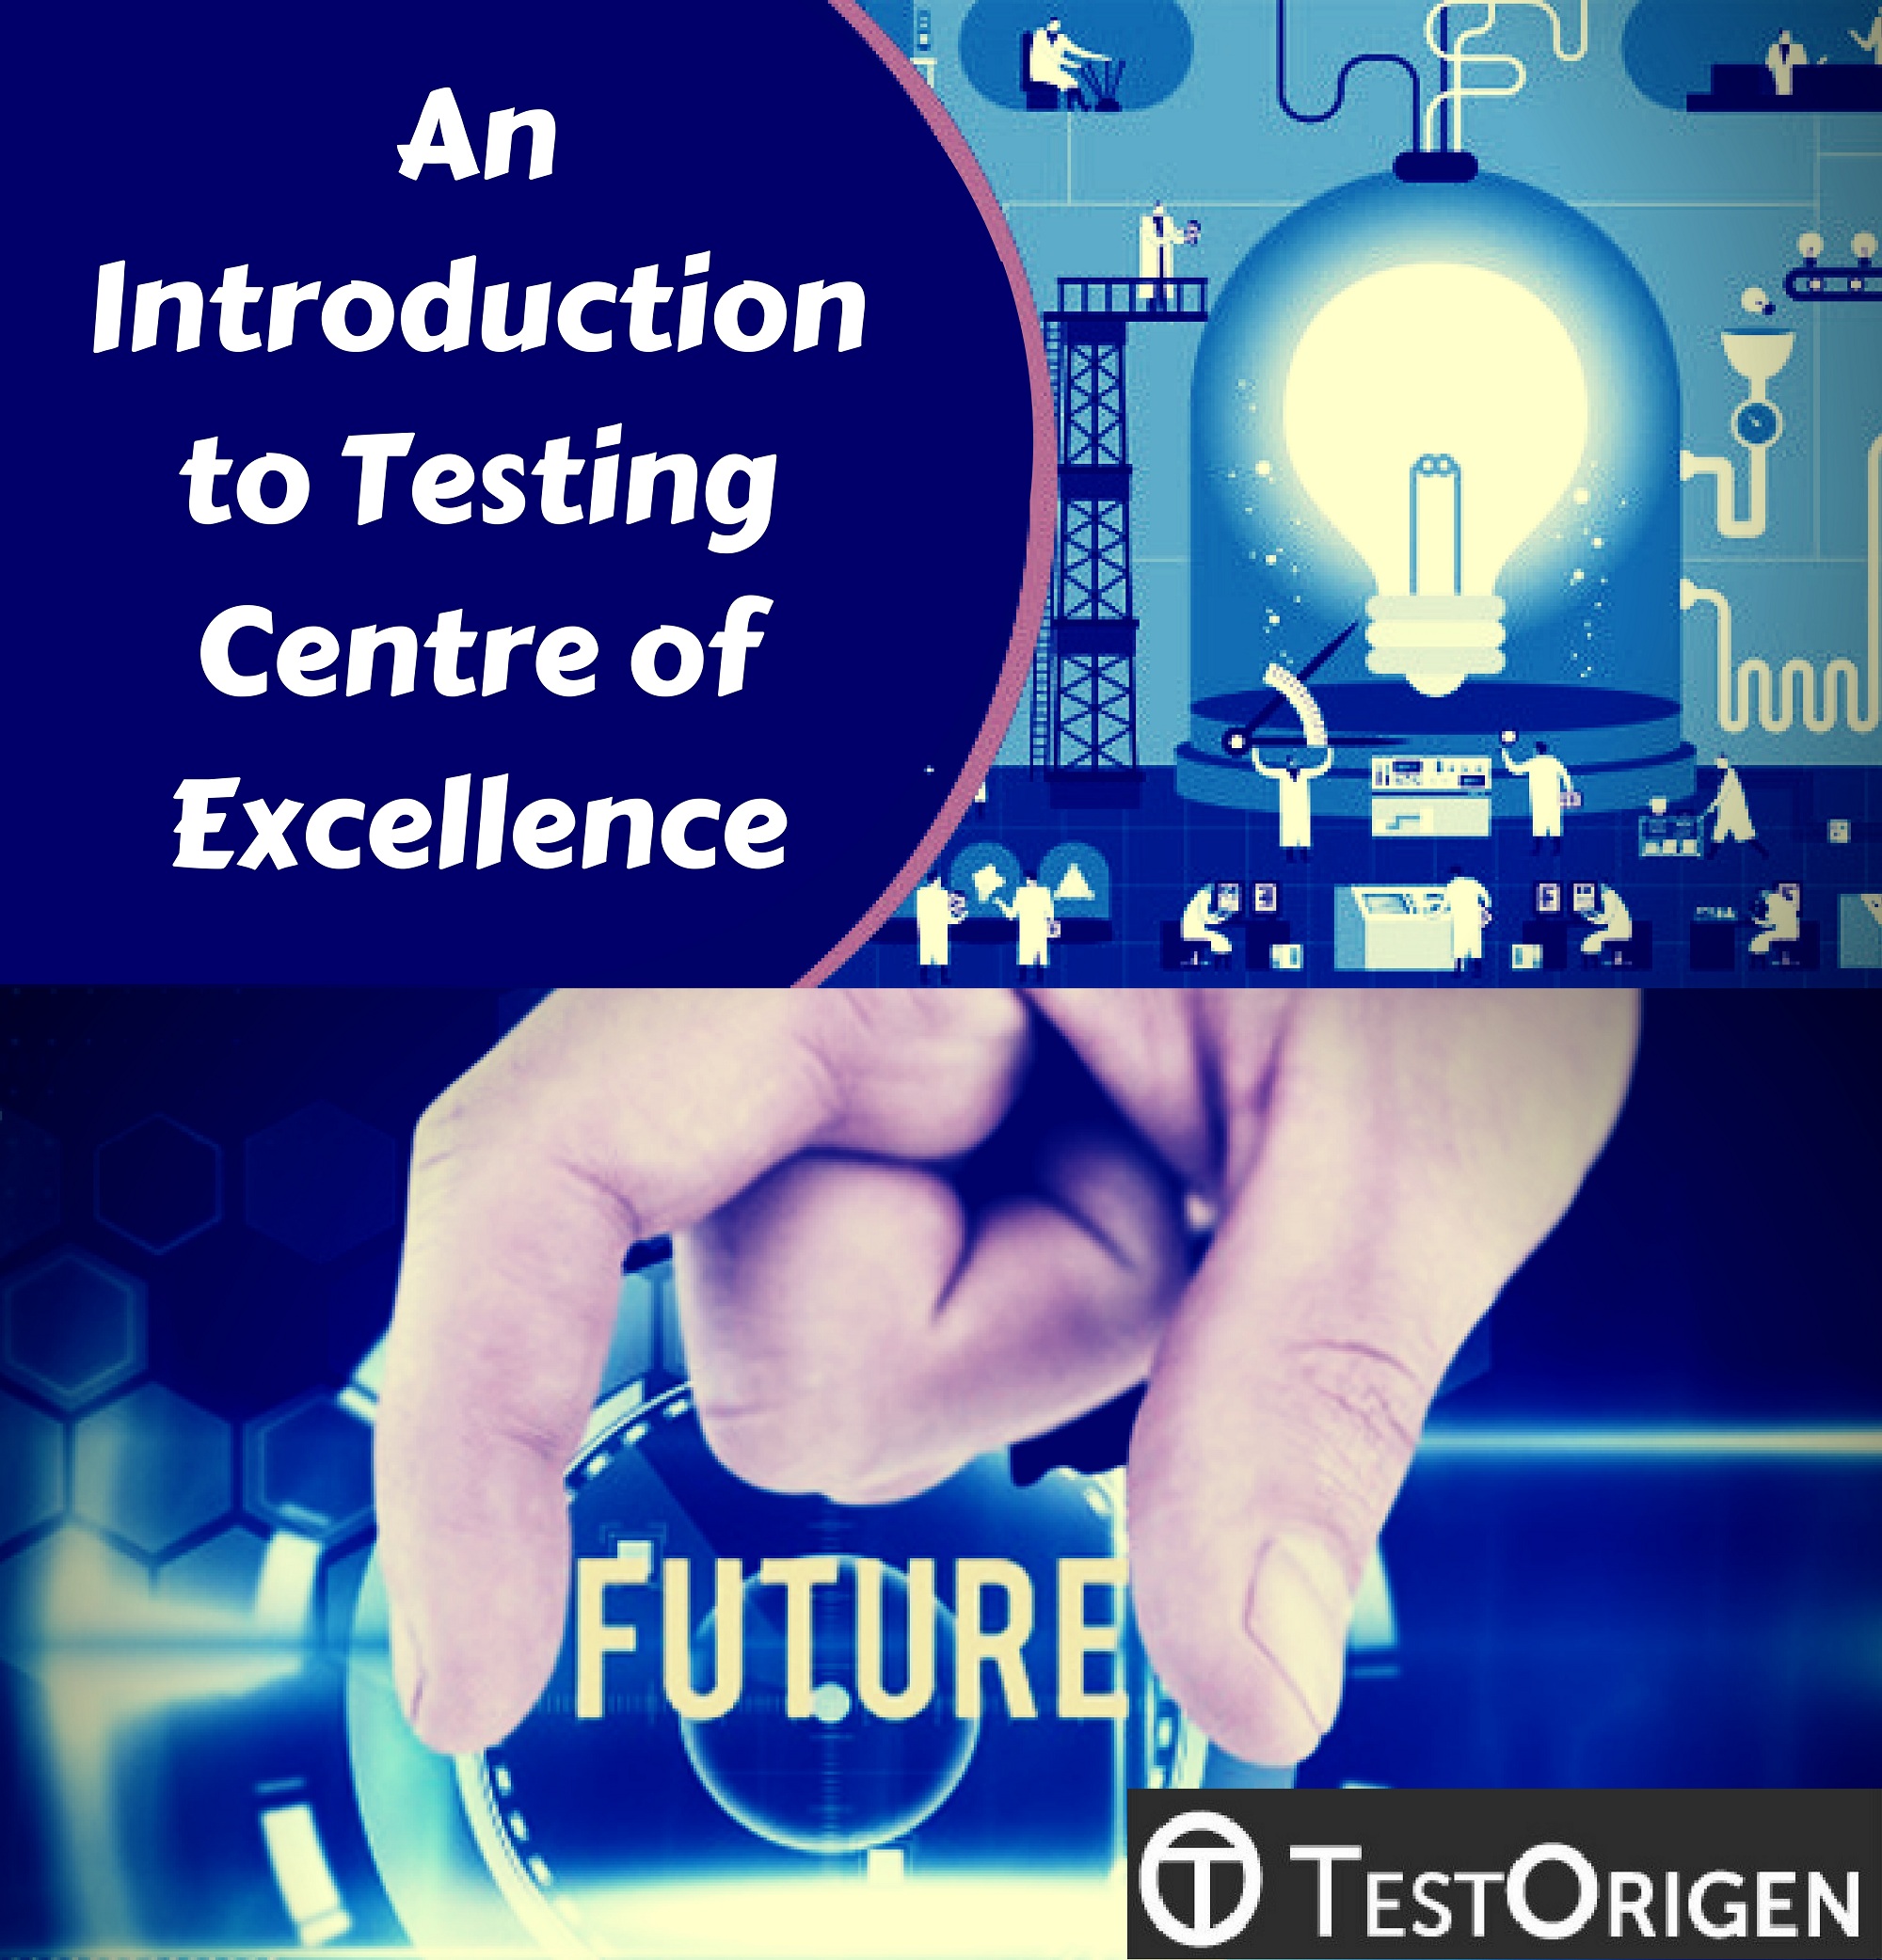 An Introduction to Testing Centre of Excellence